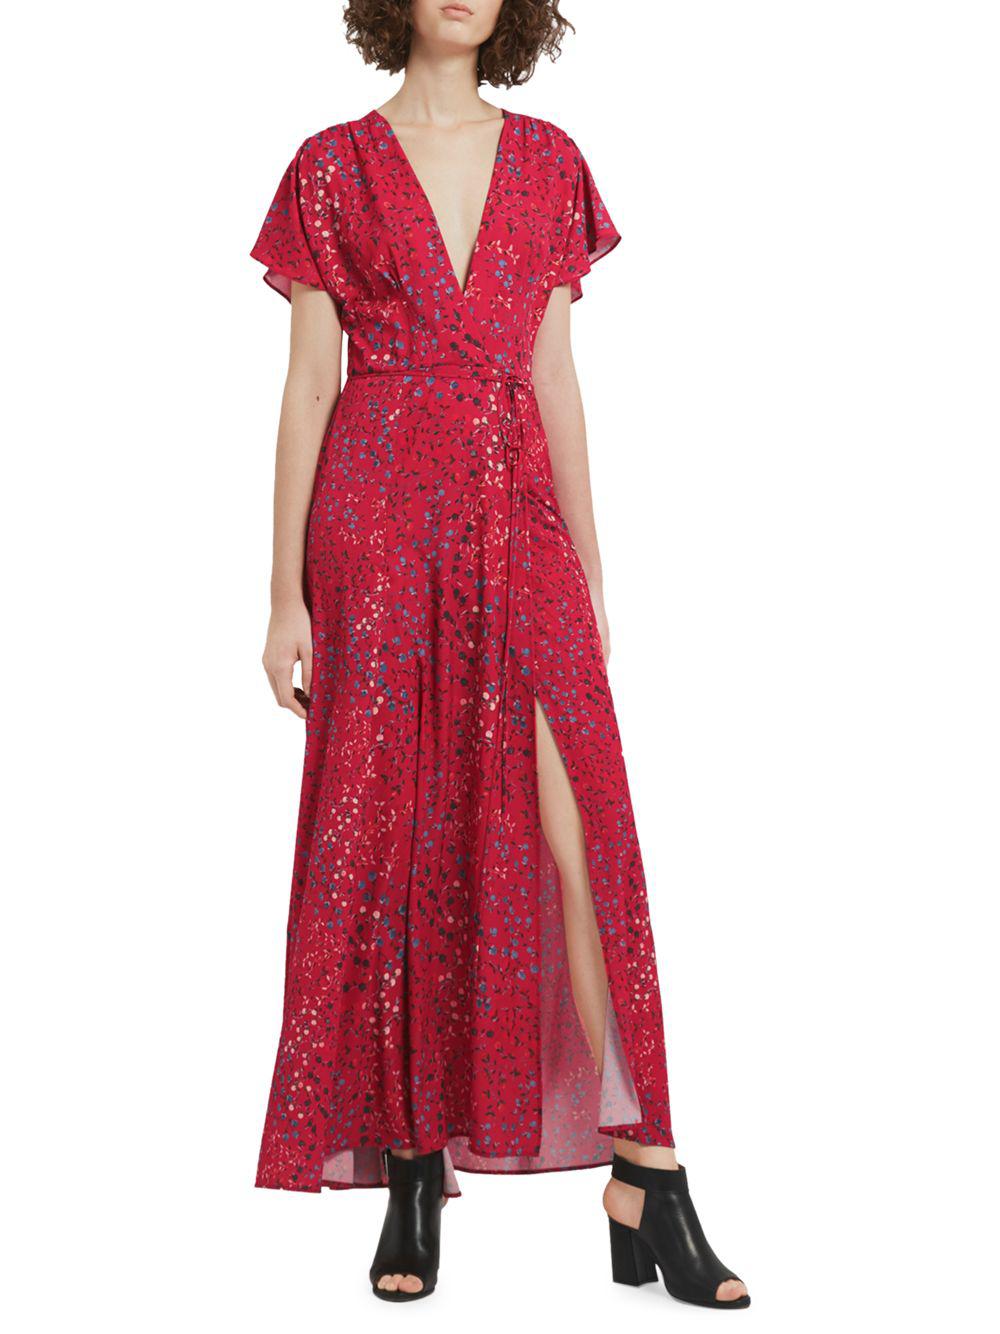 Synthetic Floral Wrap Dress ...